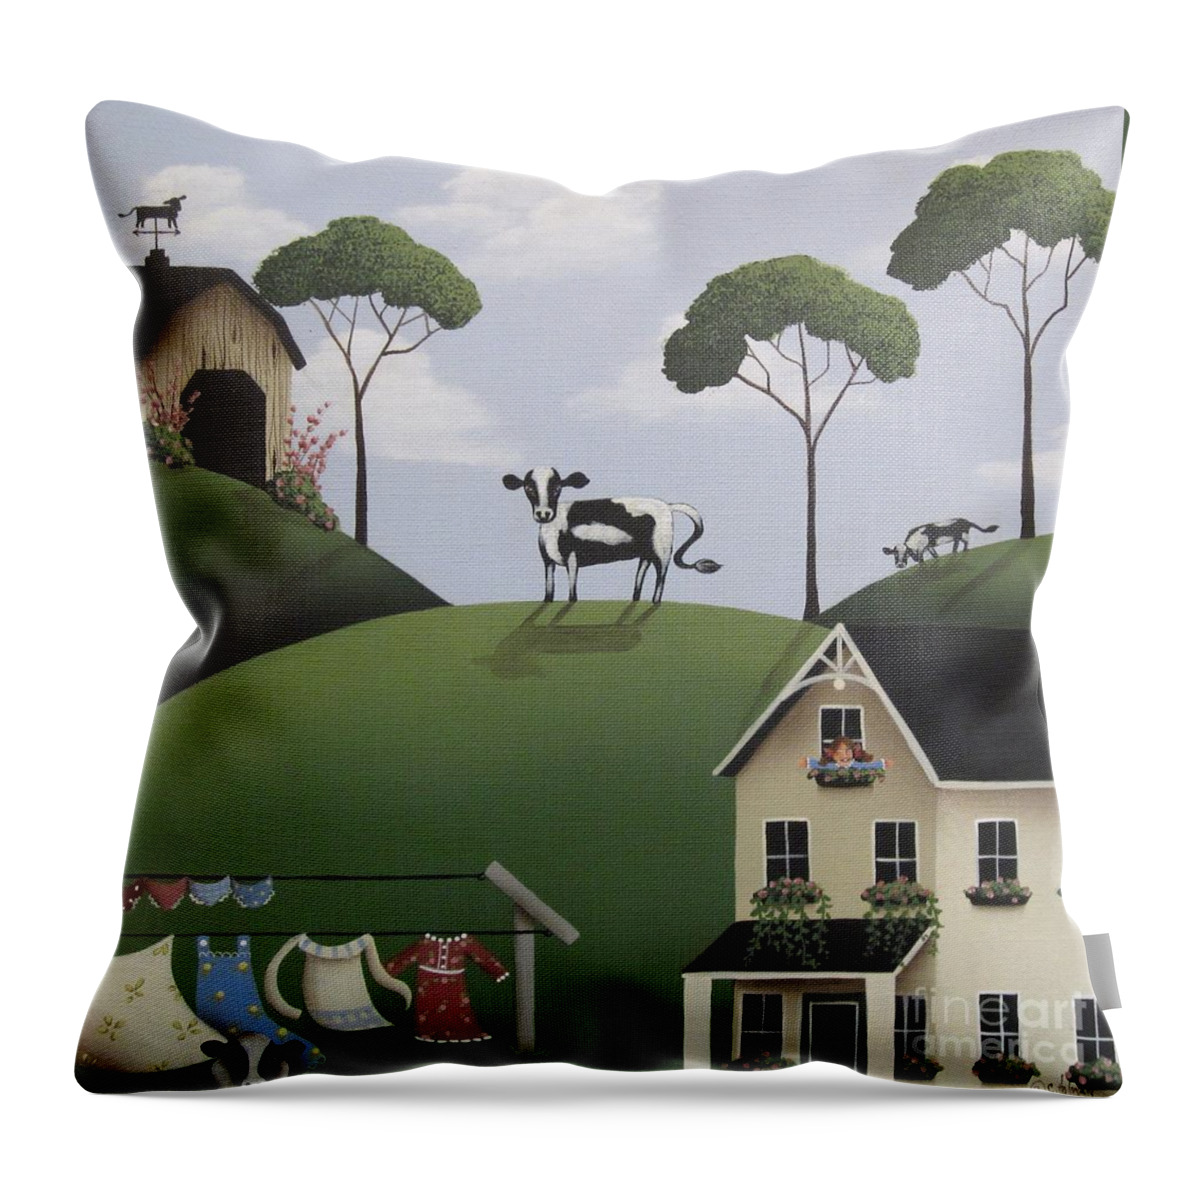 Art Throw Pillow featuring the painting Till The Cows Come Home by Catherine Holman